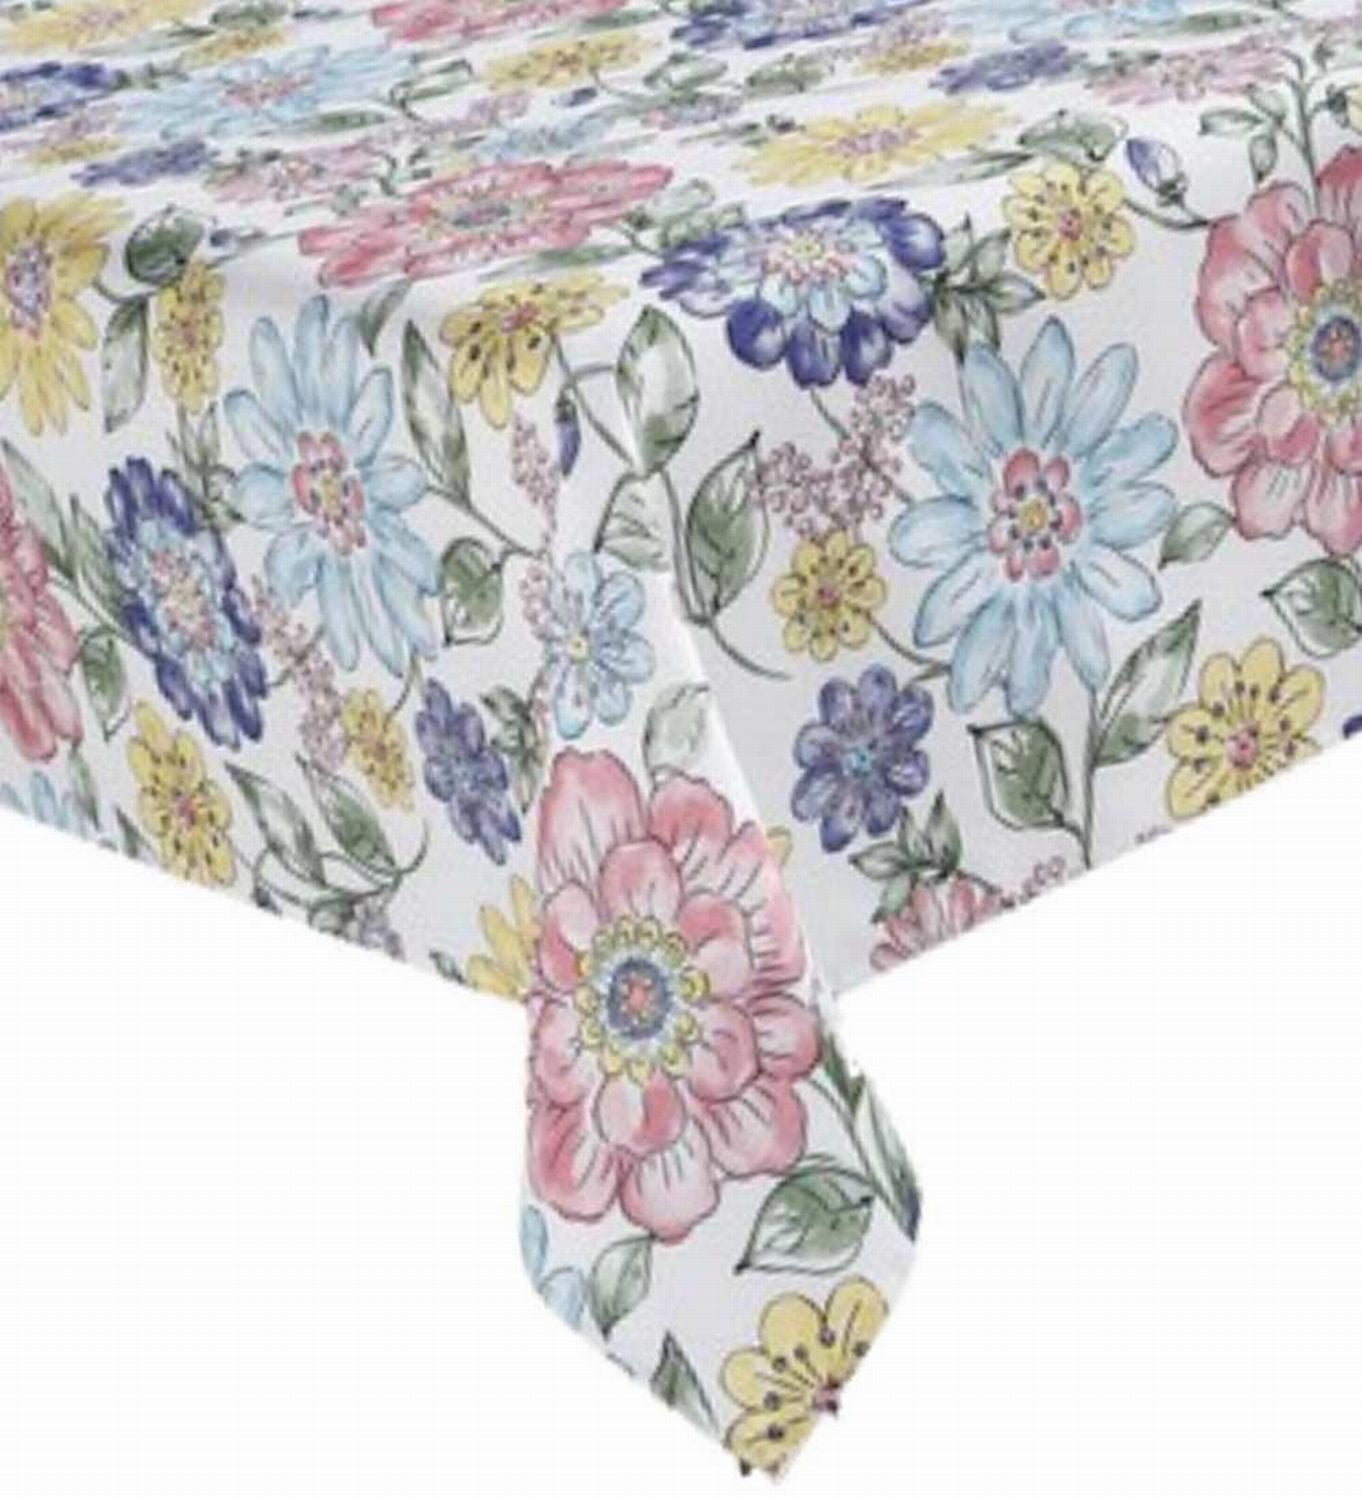 AUUXVA Floral Flower Welcome Border Tablecloth Table Covers for Round Table Picnic BBQ Dining Room Cafe Camping Kitchen Table Cloth 60 Inch Reusable